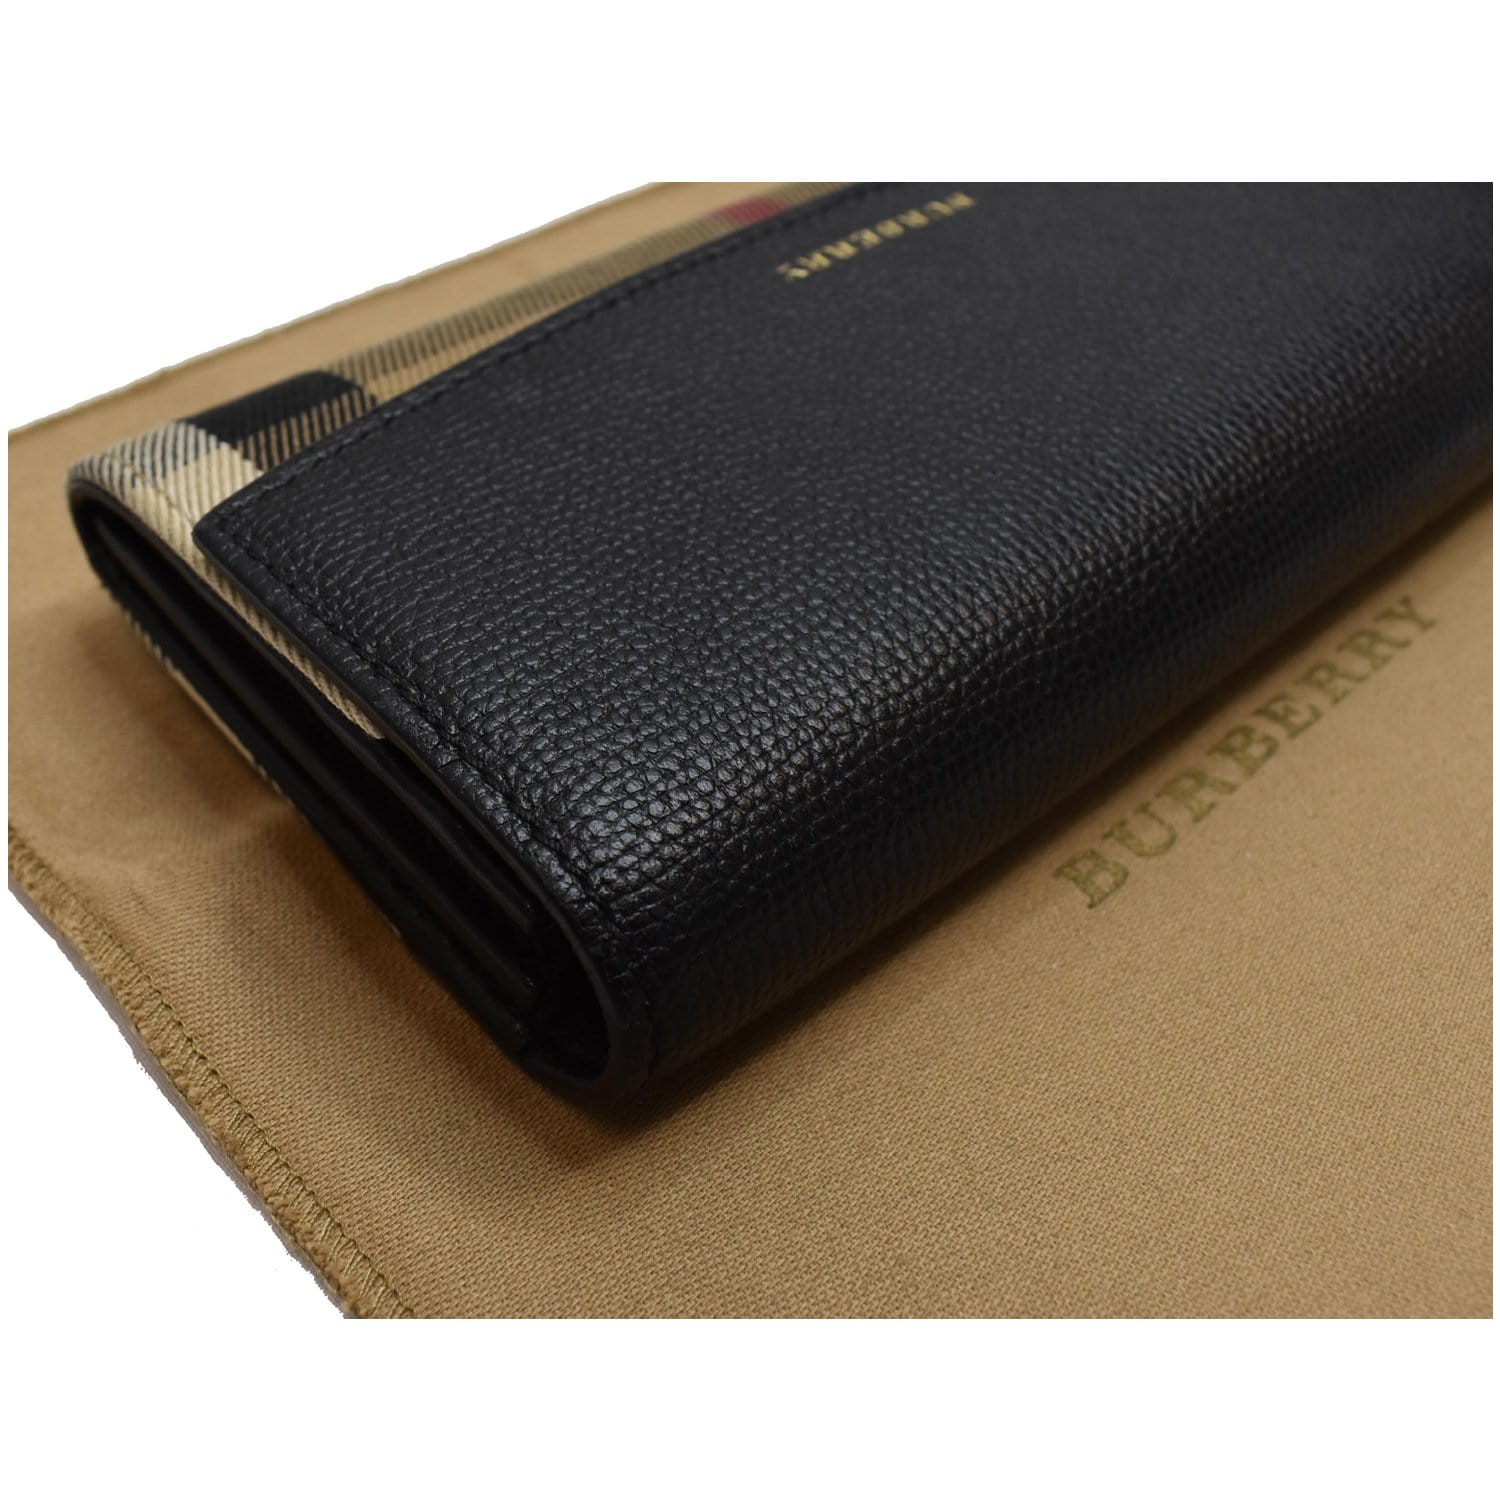 Burberry Porter Black Leather Flap Continental Long Wallet 80528311 $680